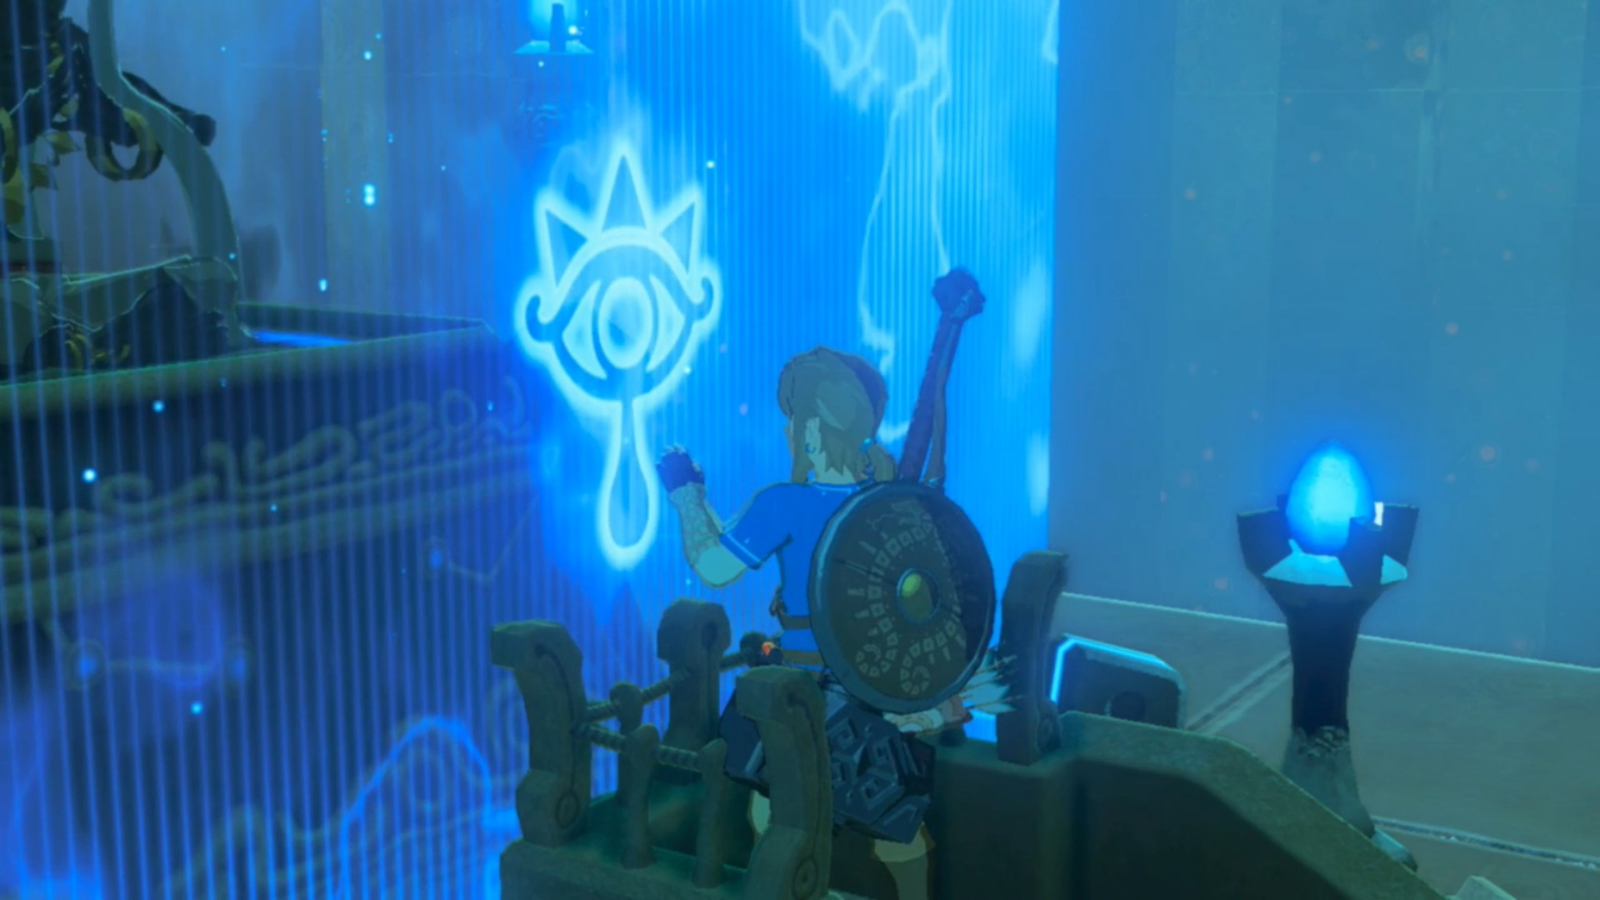 BOTW SHRINES DON'T WORK, NO LIGHTS OR ANYTHING..ANY IDEAS? : r/cemu